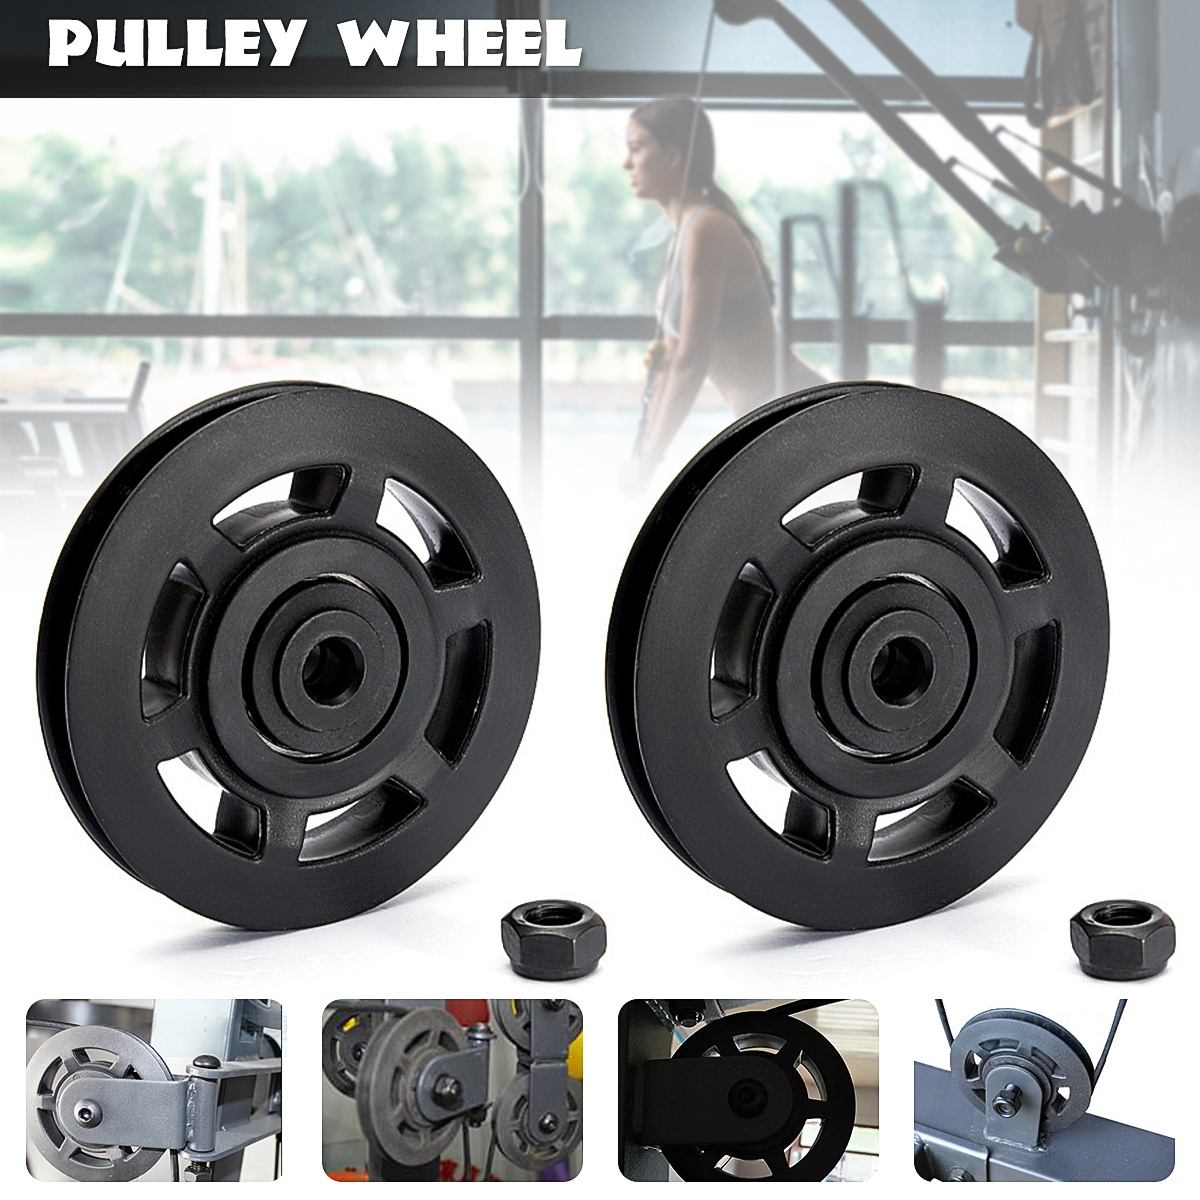 Universal-Bearing-Pulley-Wheels-Cable-Gym-Equipment-Part-Wearproof-Durable-95mm-1442918